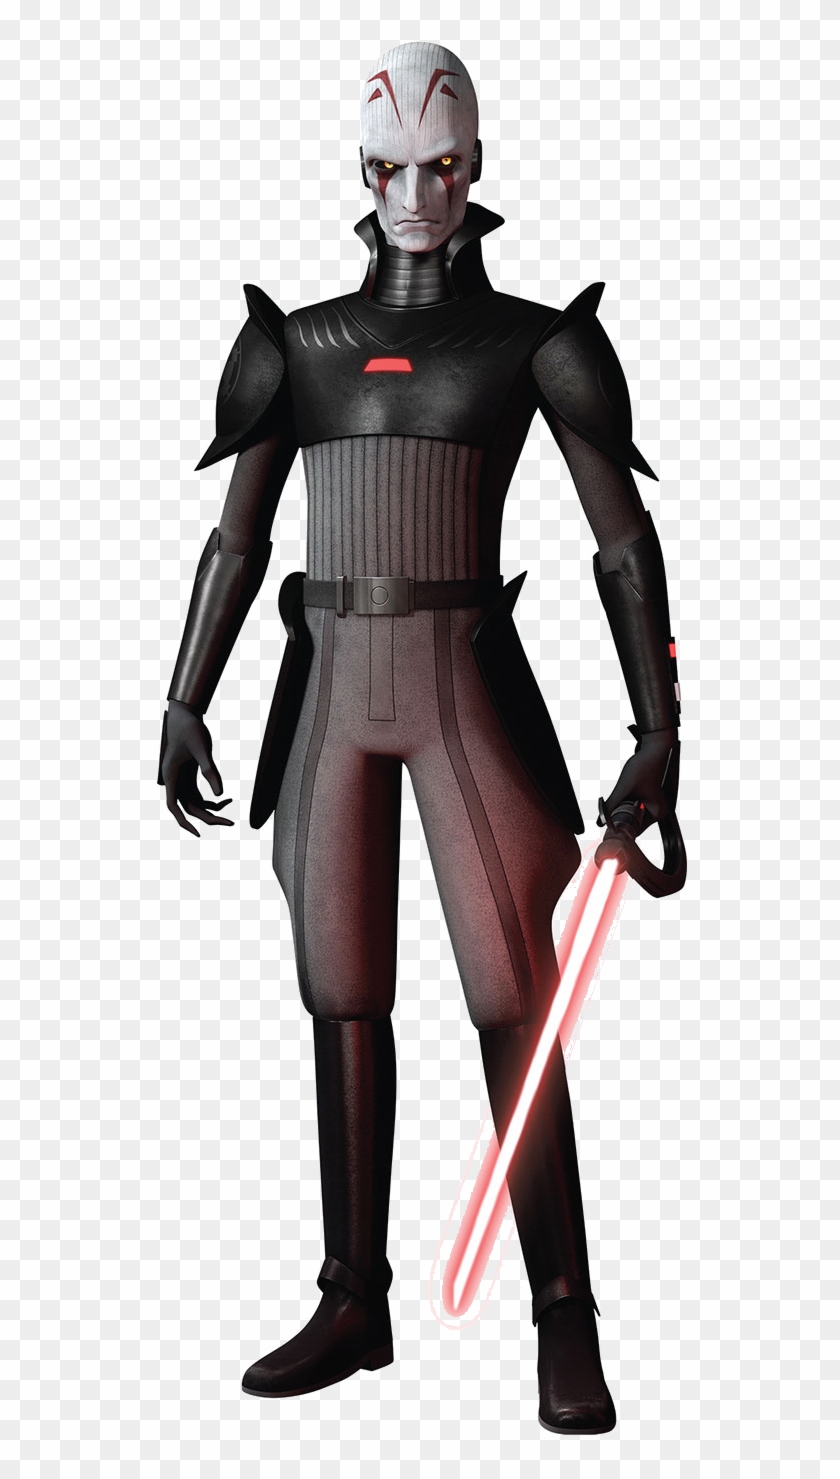 Png Star Wars Rebels - Inquisitor Star Wars Clipart #3985848